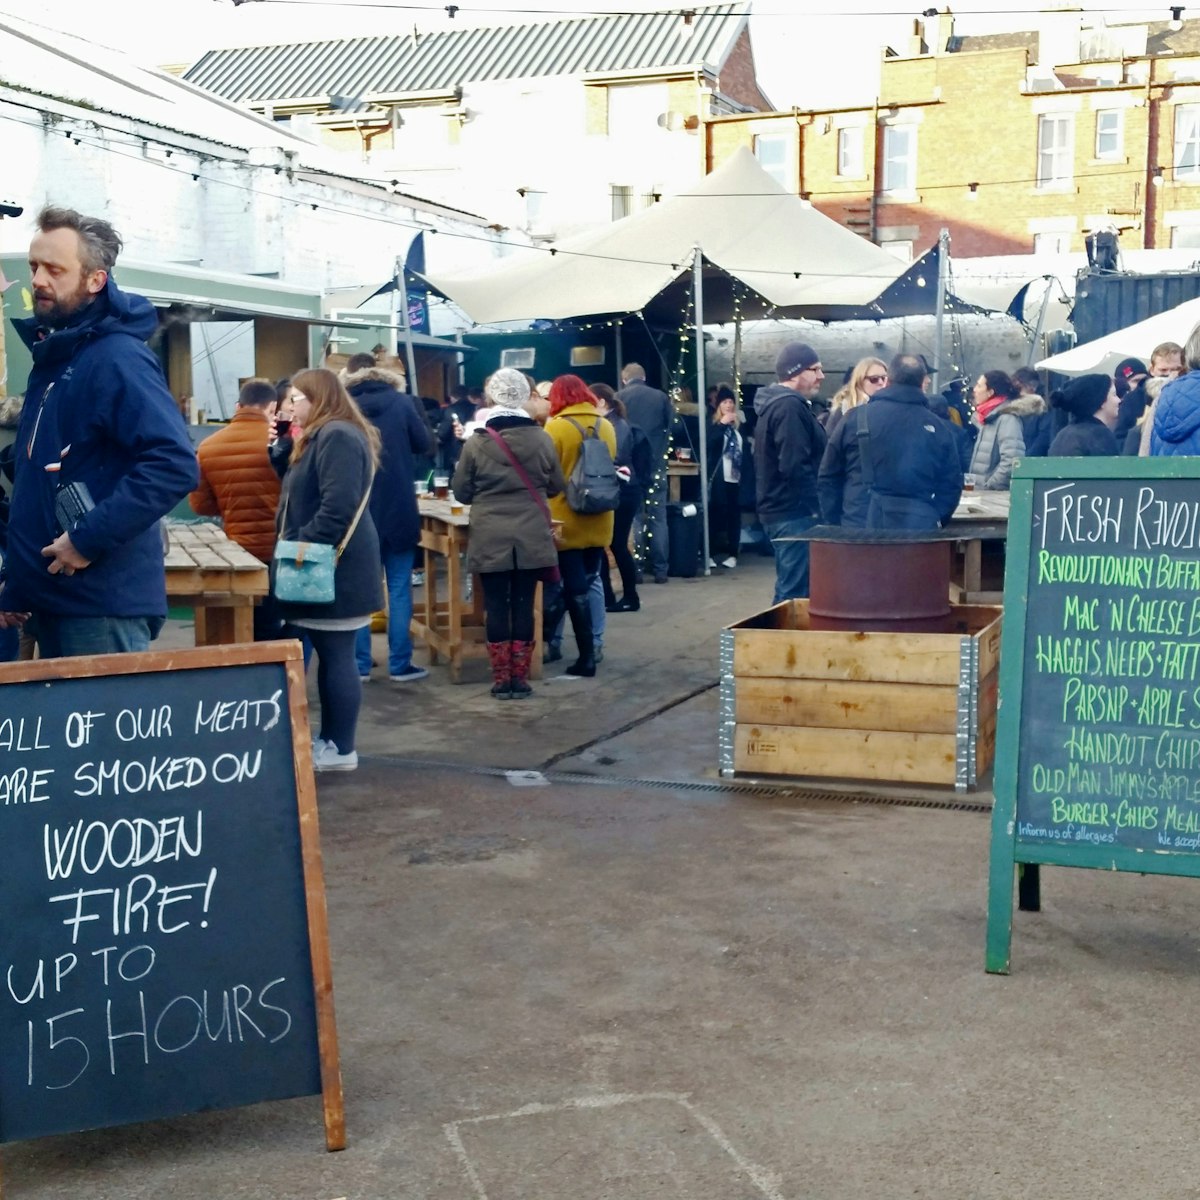 The Pitt street food market on the outskirts of Leith